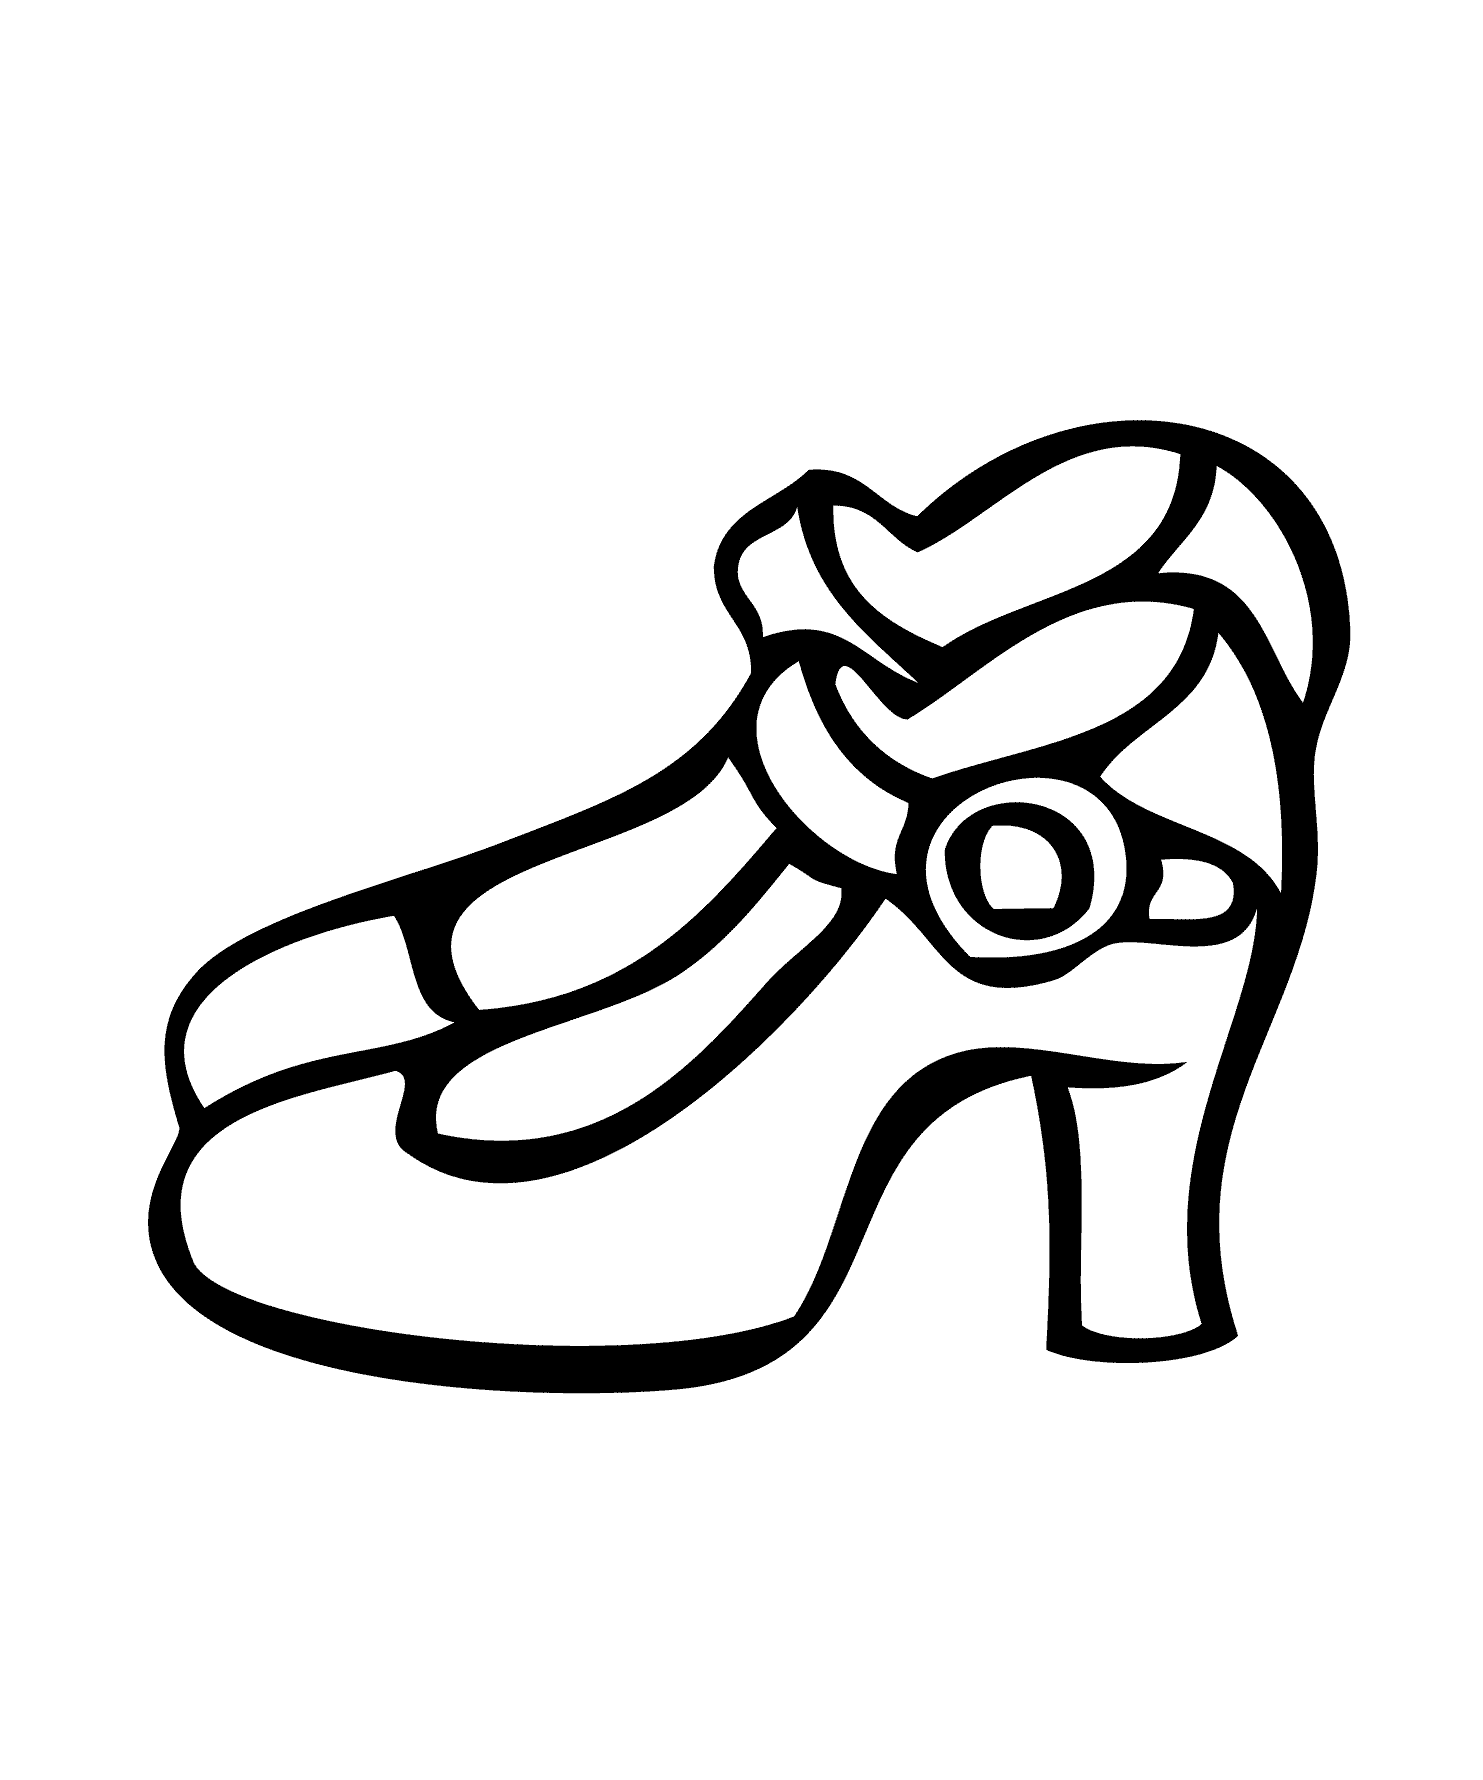 Printable Coloring Pages Shoes